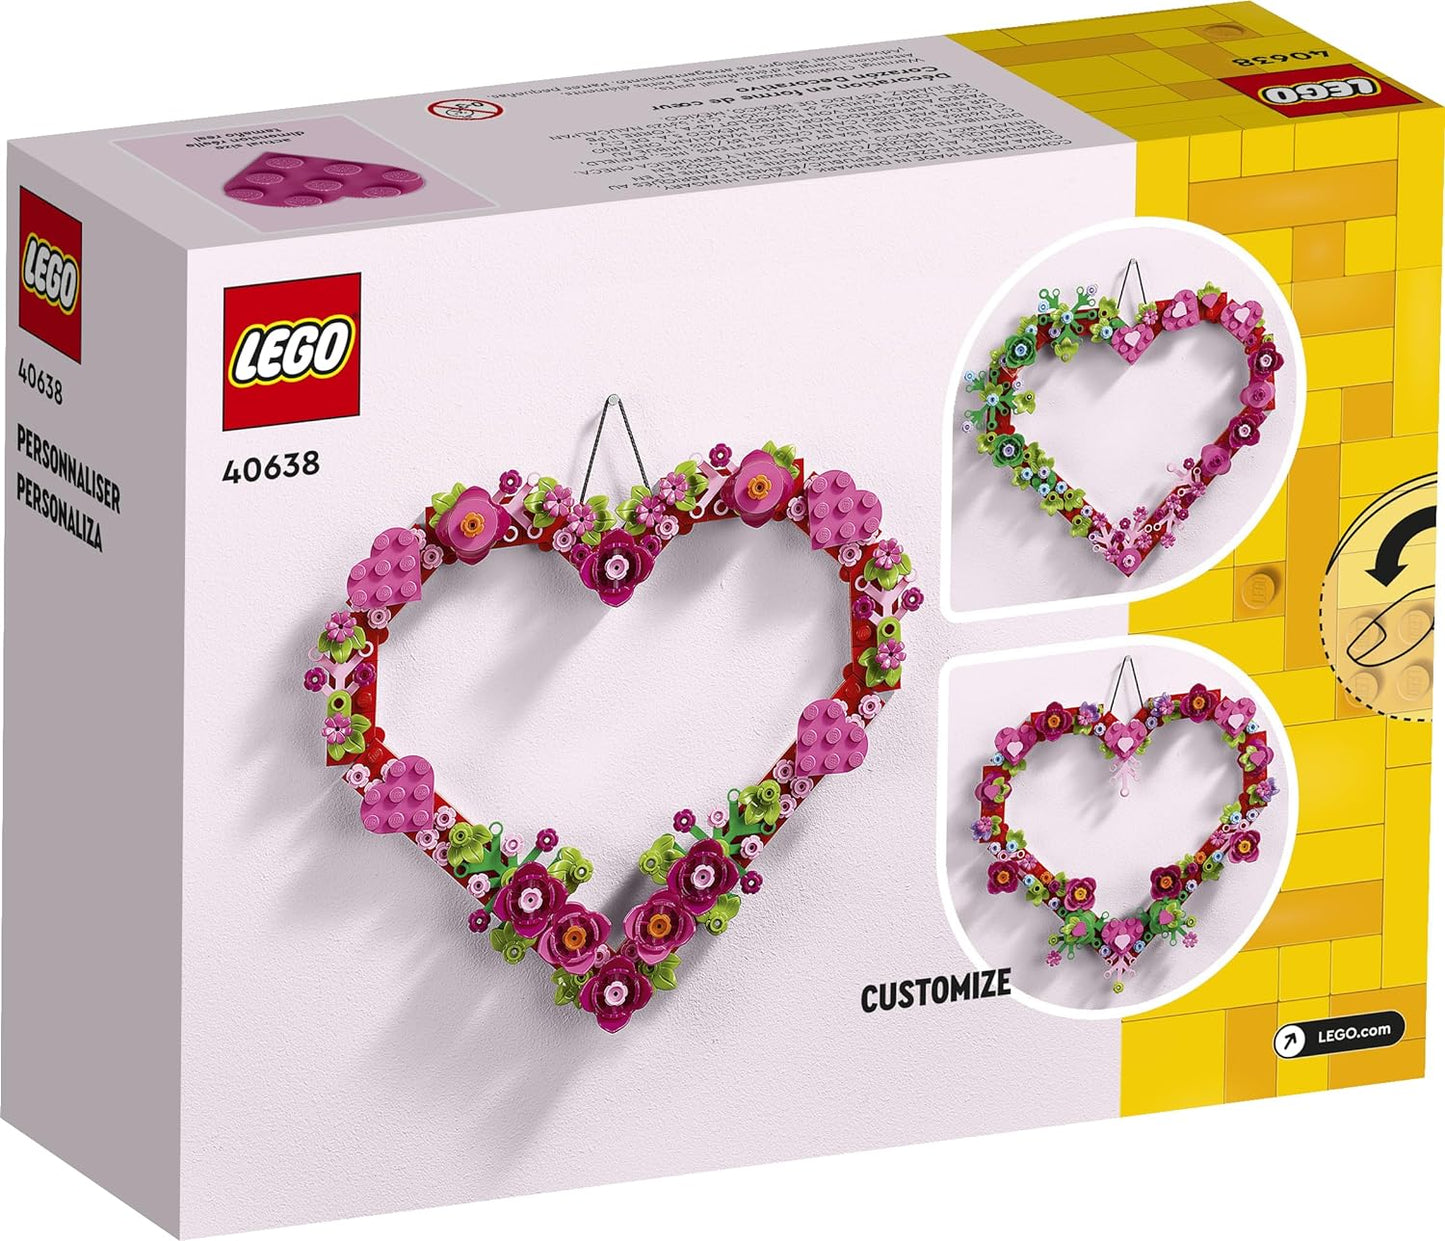 LEGO Heart Ornament Building Toy Kit, Heart Shaped Arrangement of Artificial Flowers, Great Gift for Valentine's Day, Unique Arts & Crafts Activity for Kids, Girls and Boys Ages 9 and Up, 40638